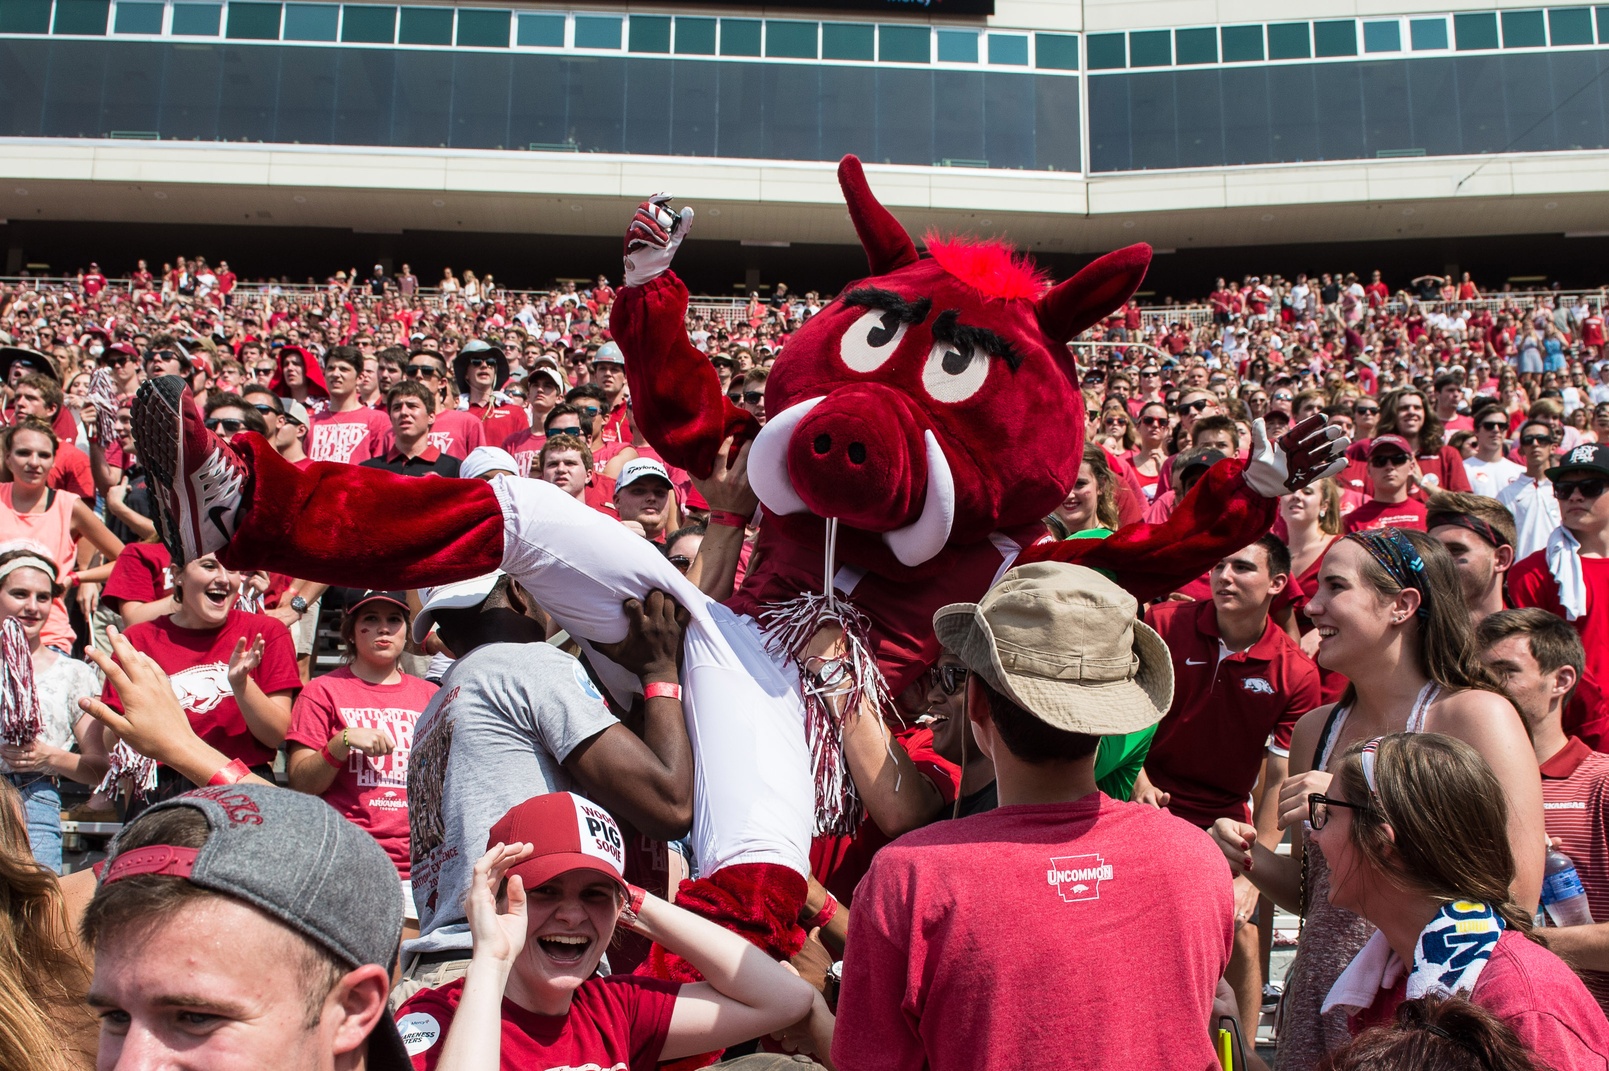 Sep 5, 2015; Fayetteville, AR, USA; The Arkansas Razorbacks mascot crowd surfs with the fans during the game between the Razorbacks and the UTEP Miners at Donald W. Reynolds Razorback Stadium. The Razorbacks defeat the Miners 48-13. Mandatory Credit: Jerome Miron-USA TODAY Sports